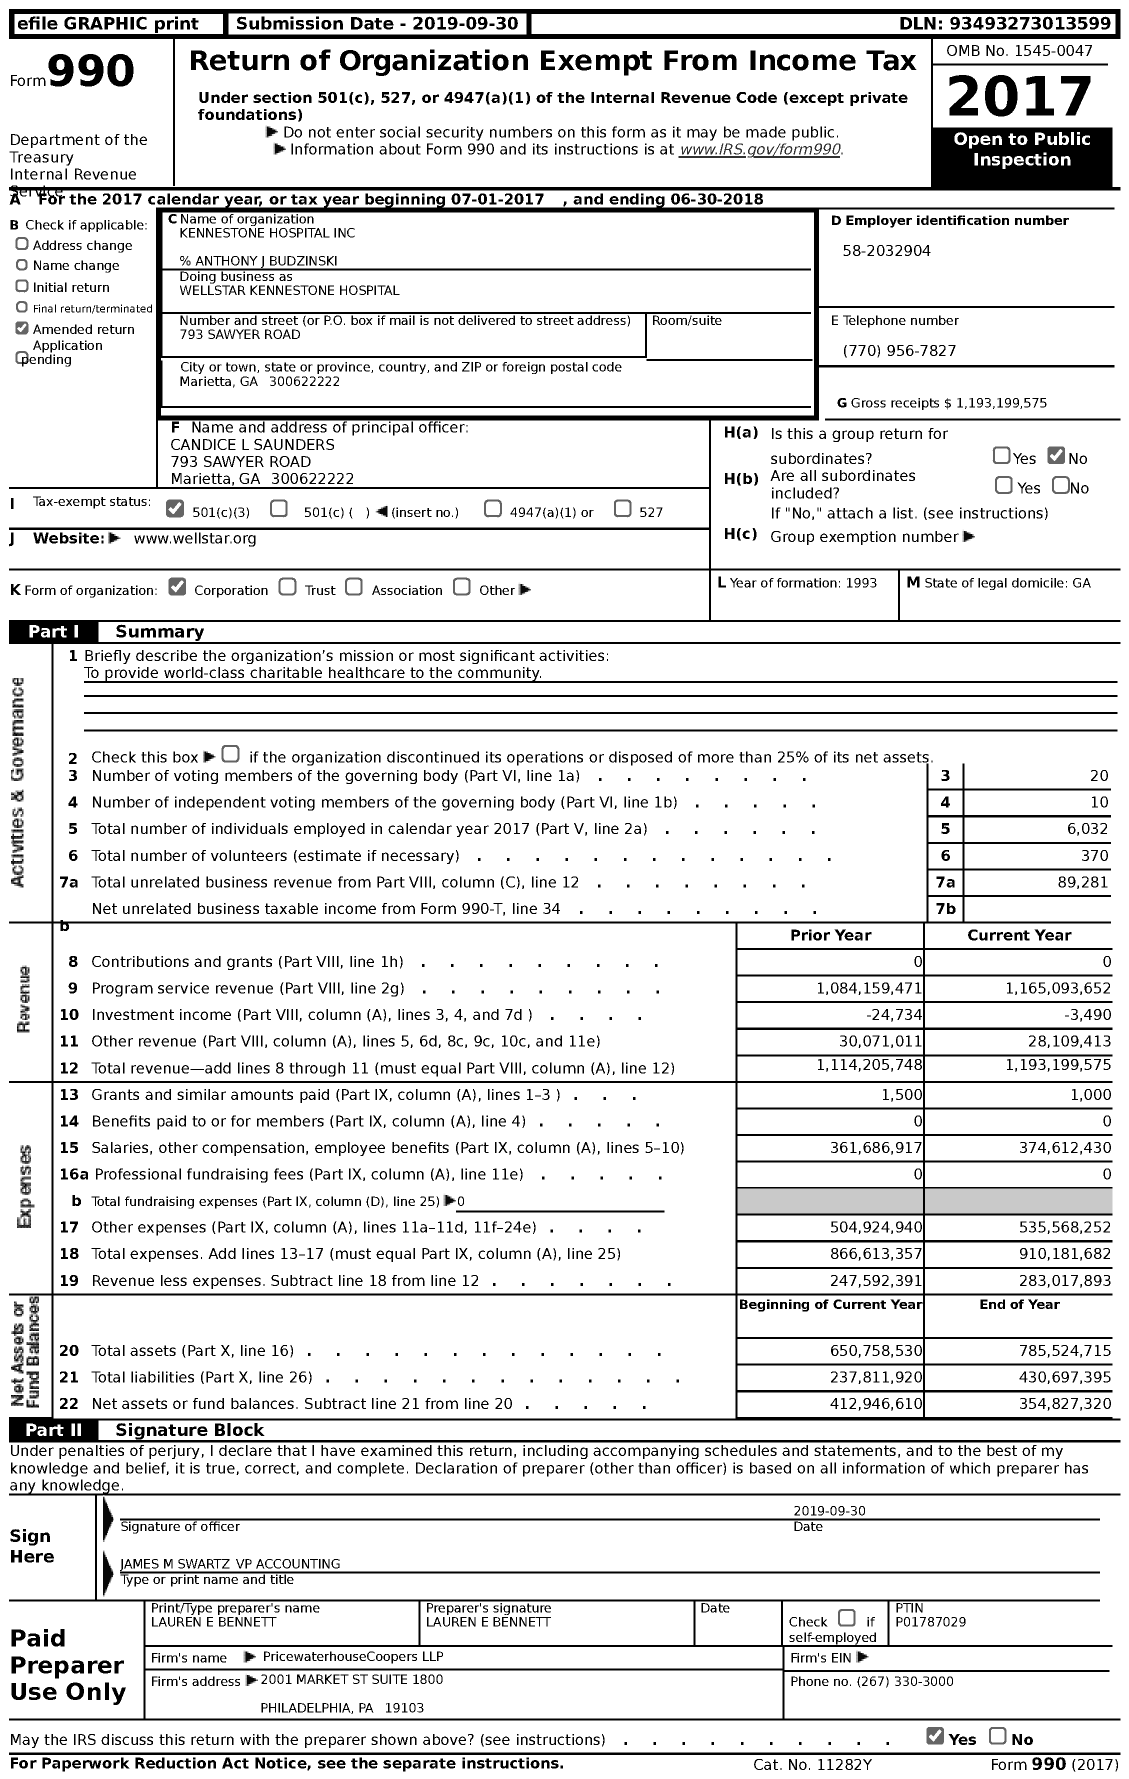 Image of first page of 2017 Form 990 for Kennestone Hospital